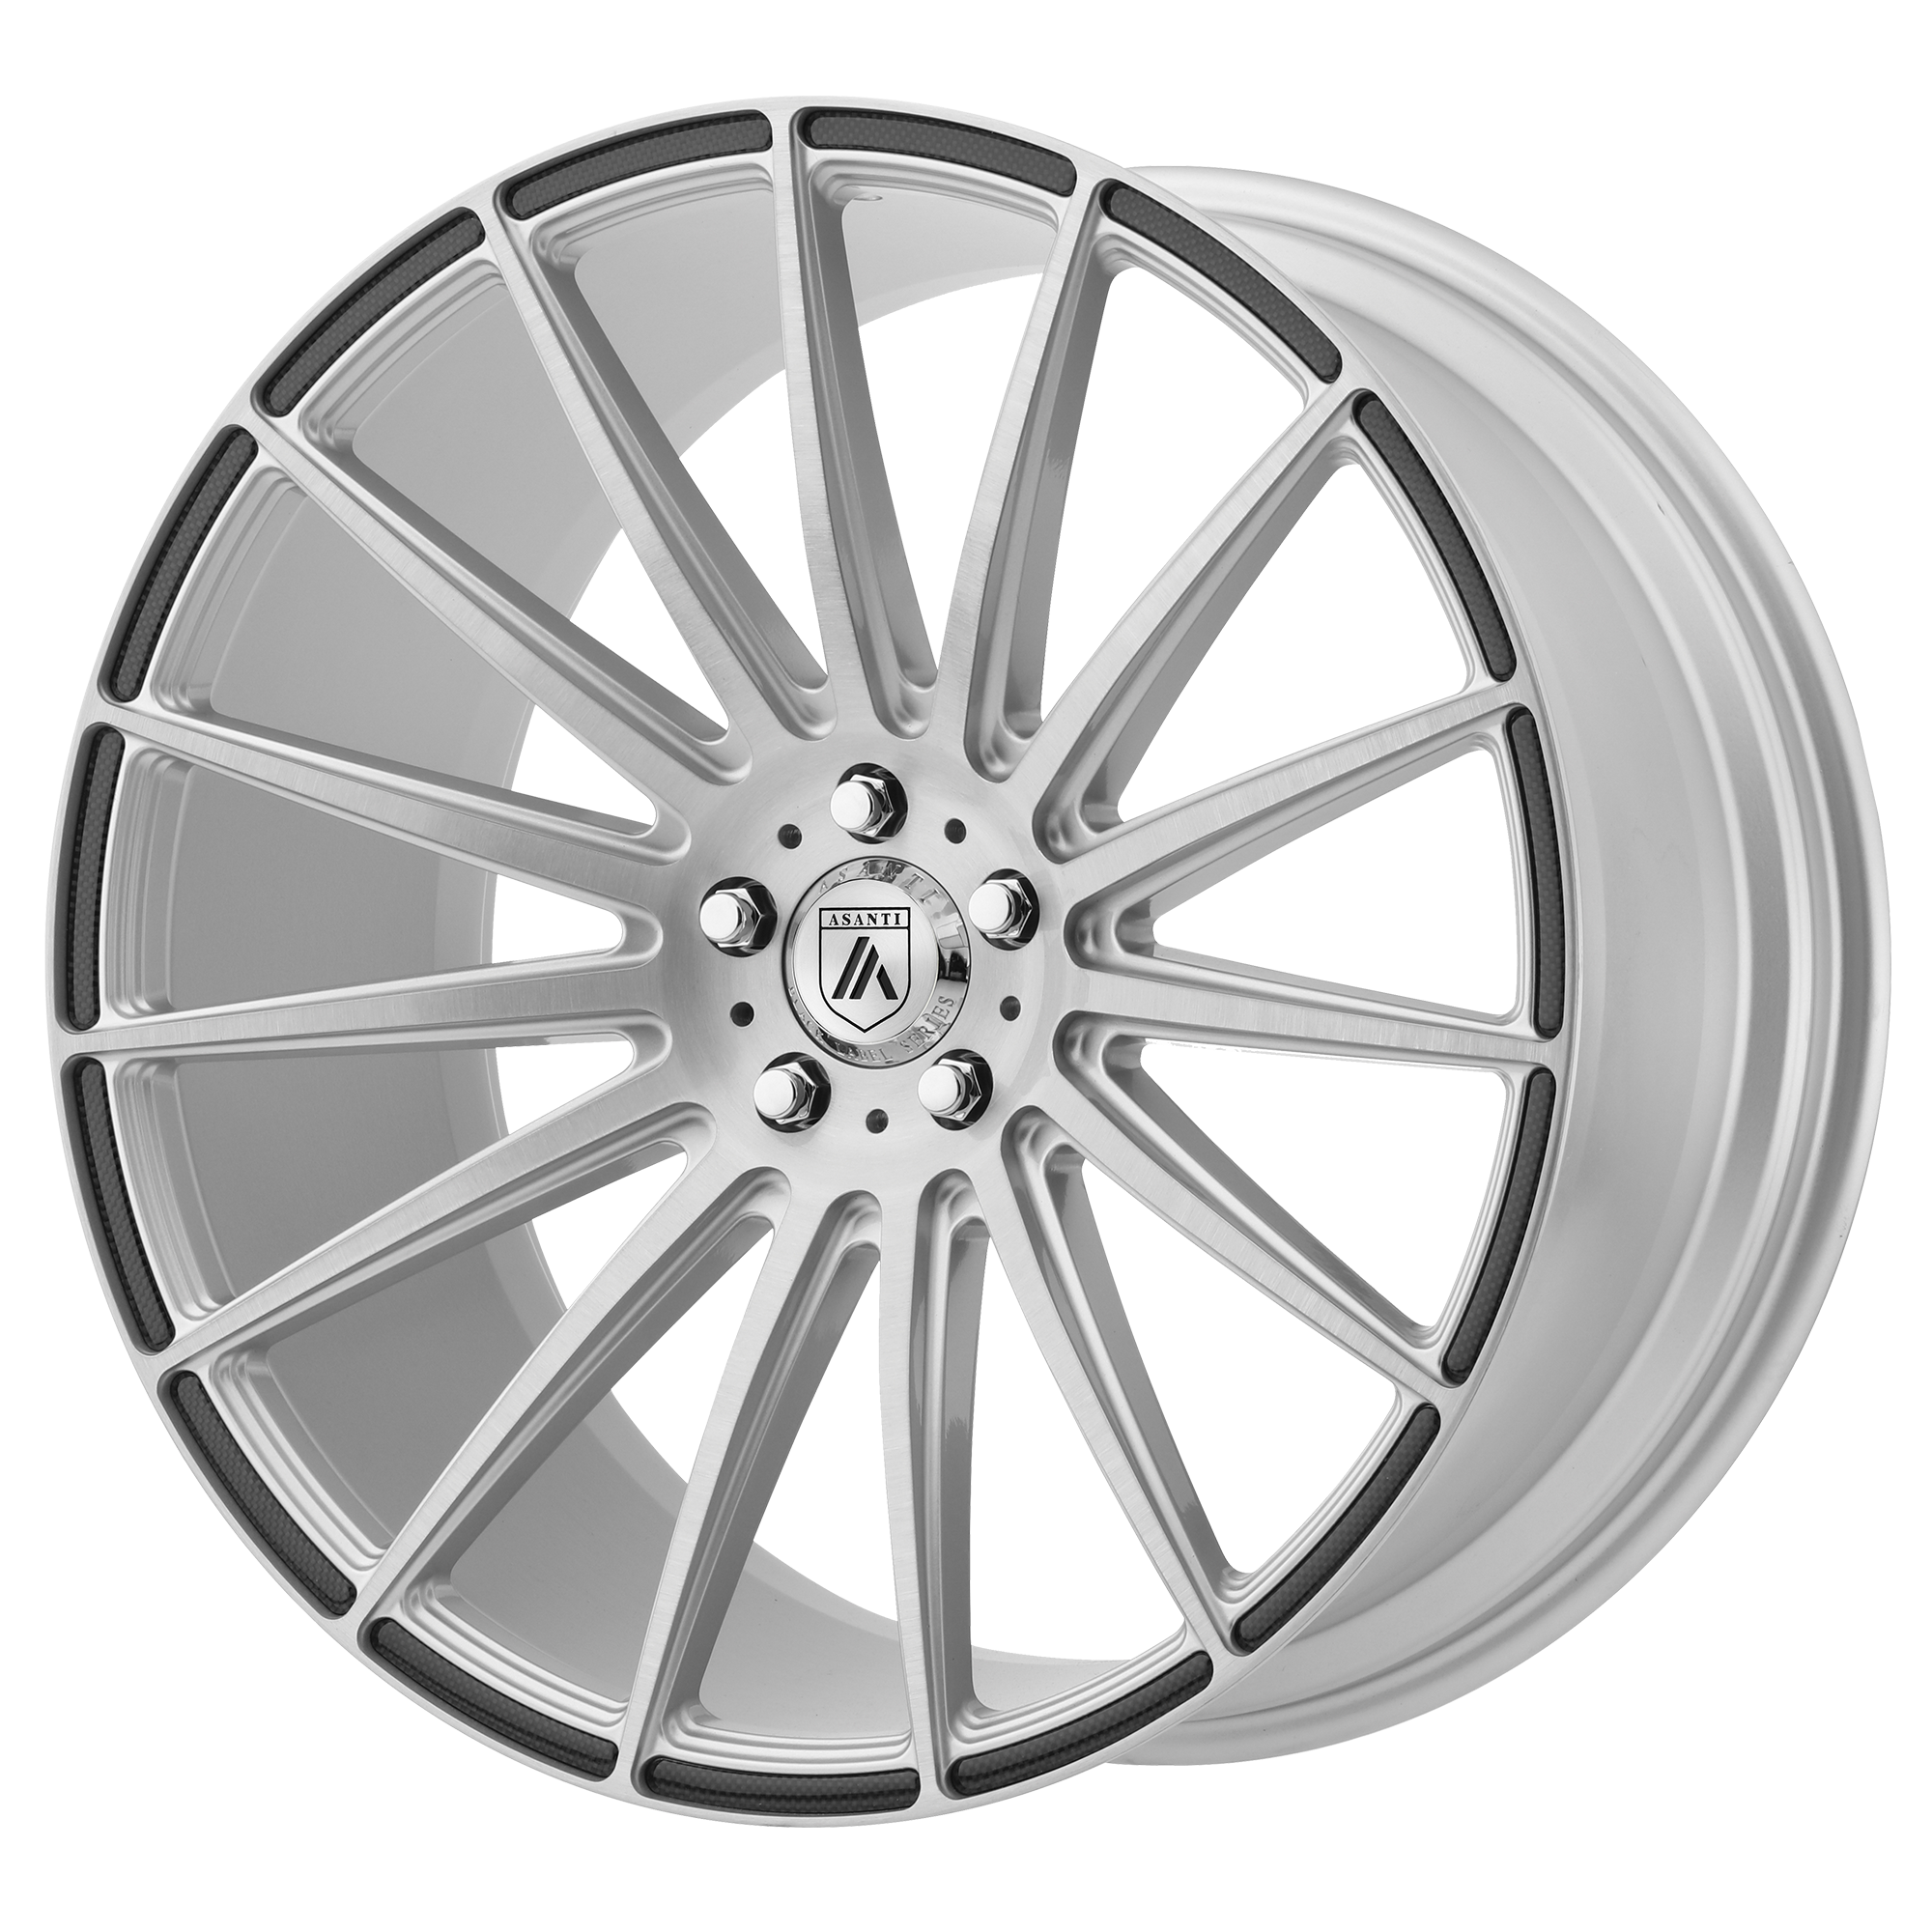 POLARIS 22x10.5 Blank BRUSHED SILVER W/ CARBON FIBER INSERTS (25.00 - 34.00 mm) - Tires and Engine Performance